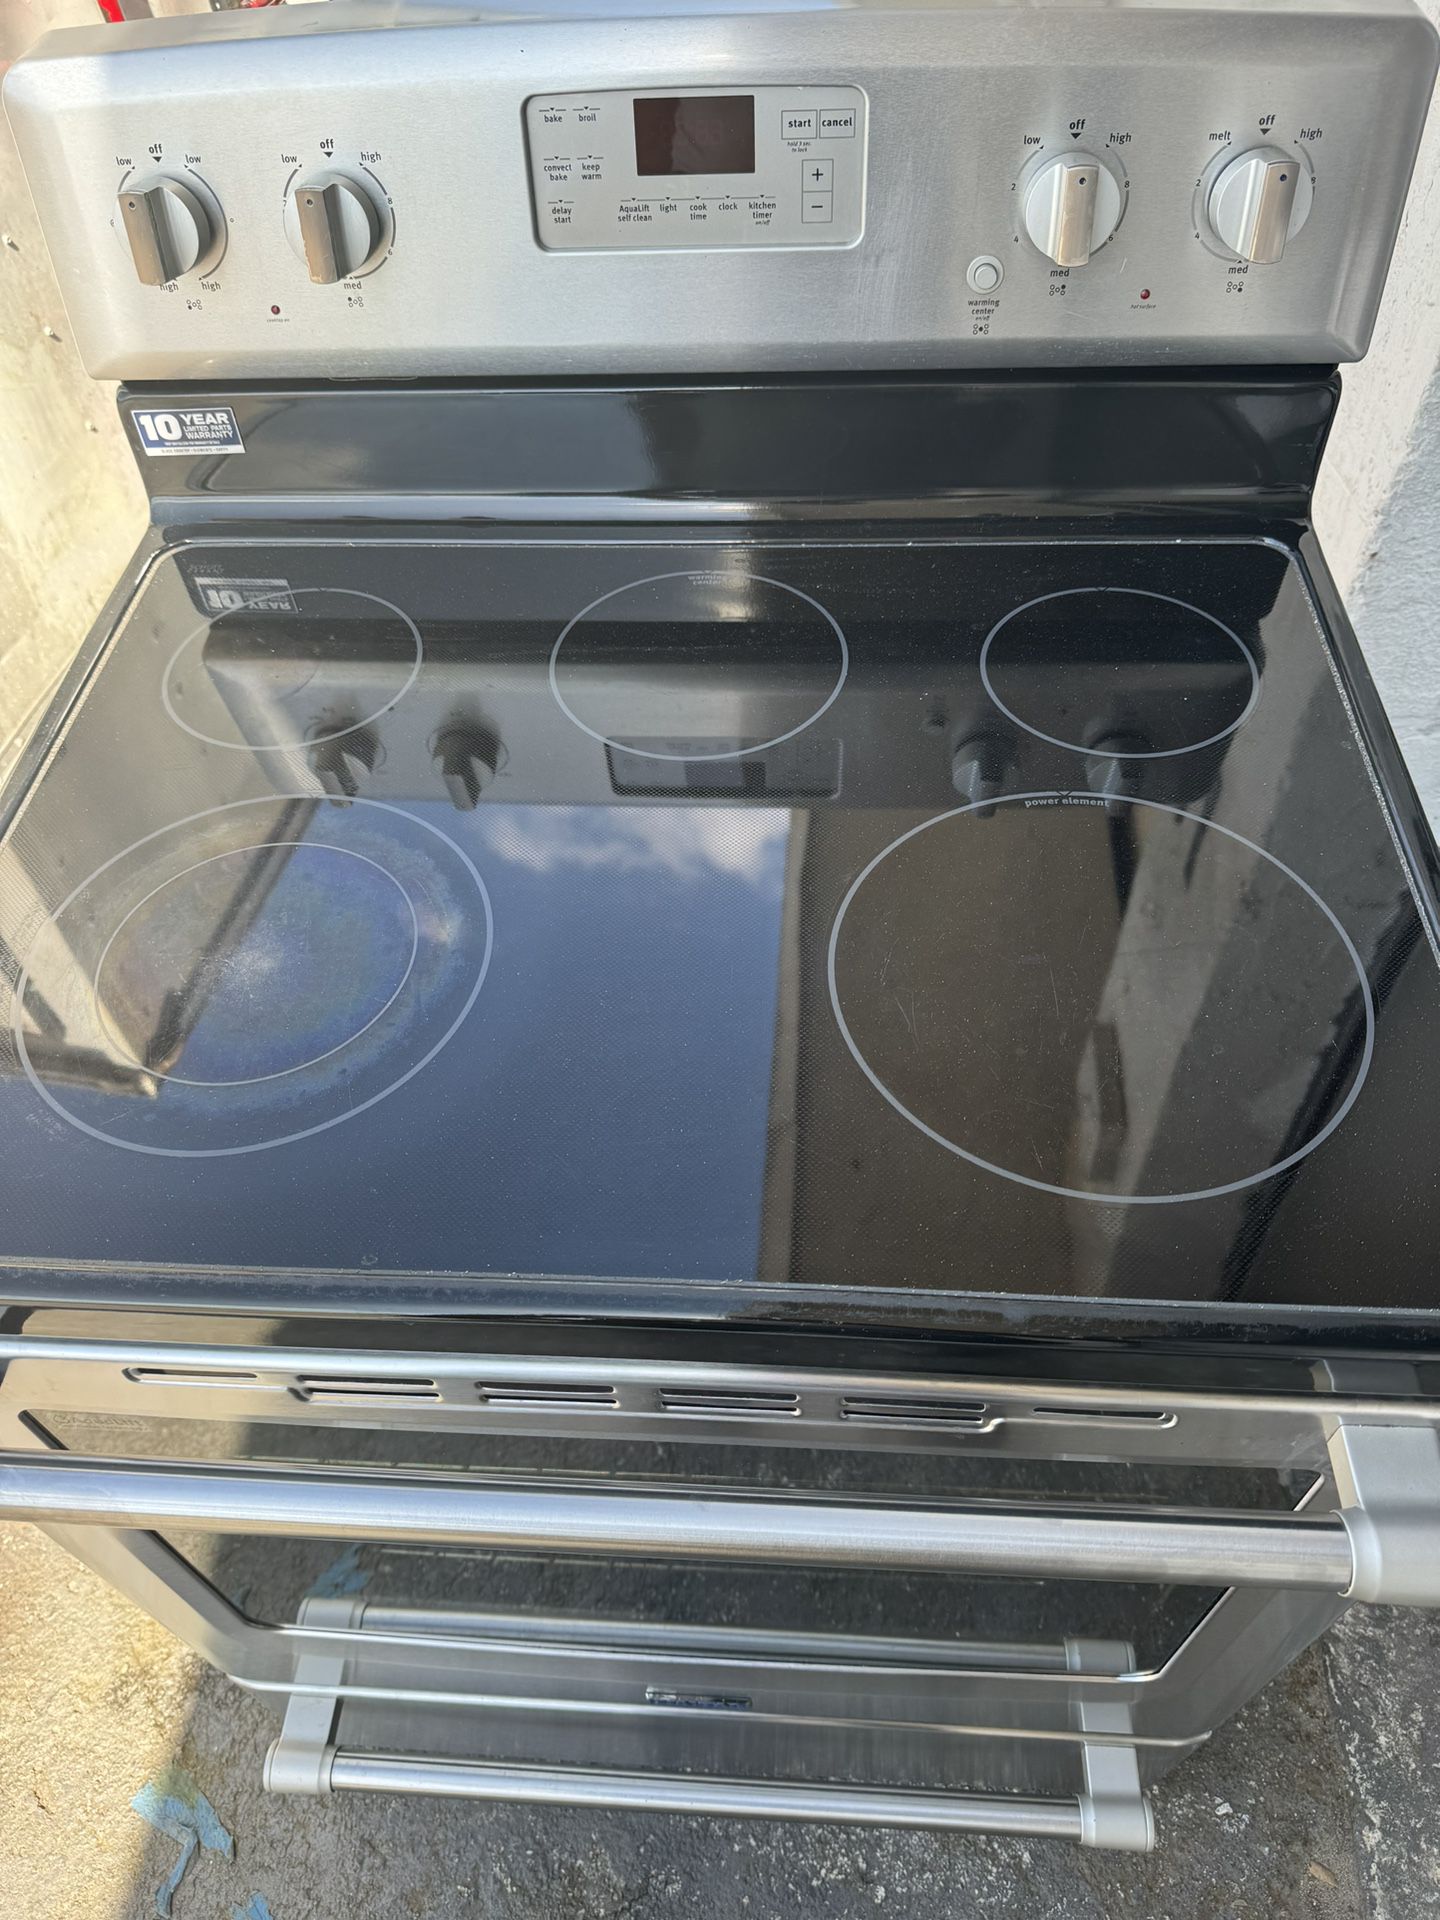 STOVE FRIGIDAIRE STAINLESS STEEL 